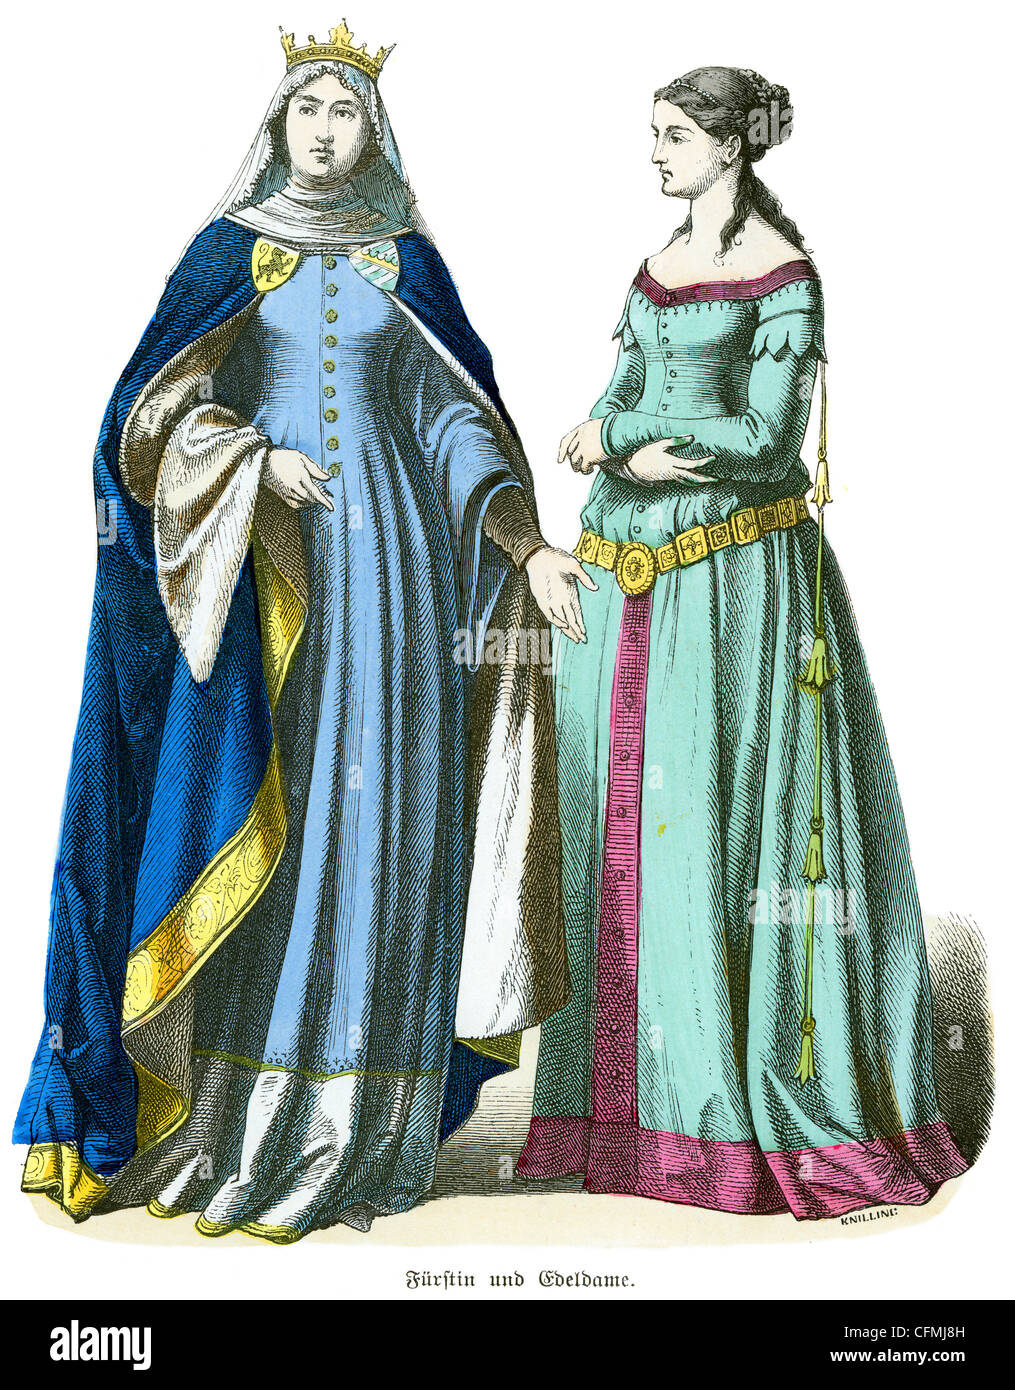 A couple of women in the dress of a 14th century Princess and Noble Woman Stock Photo